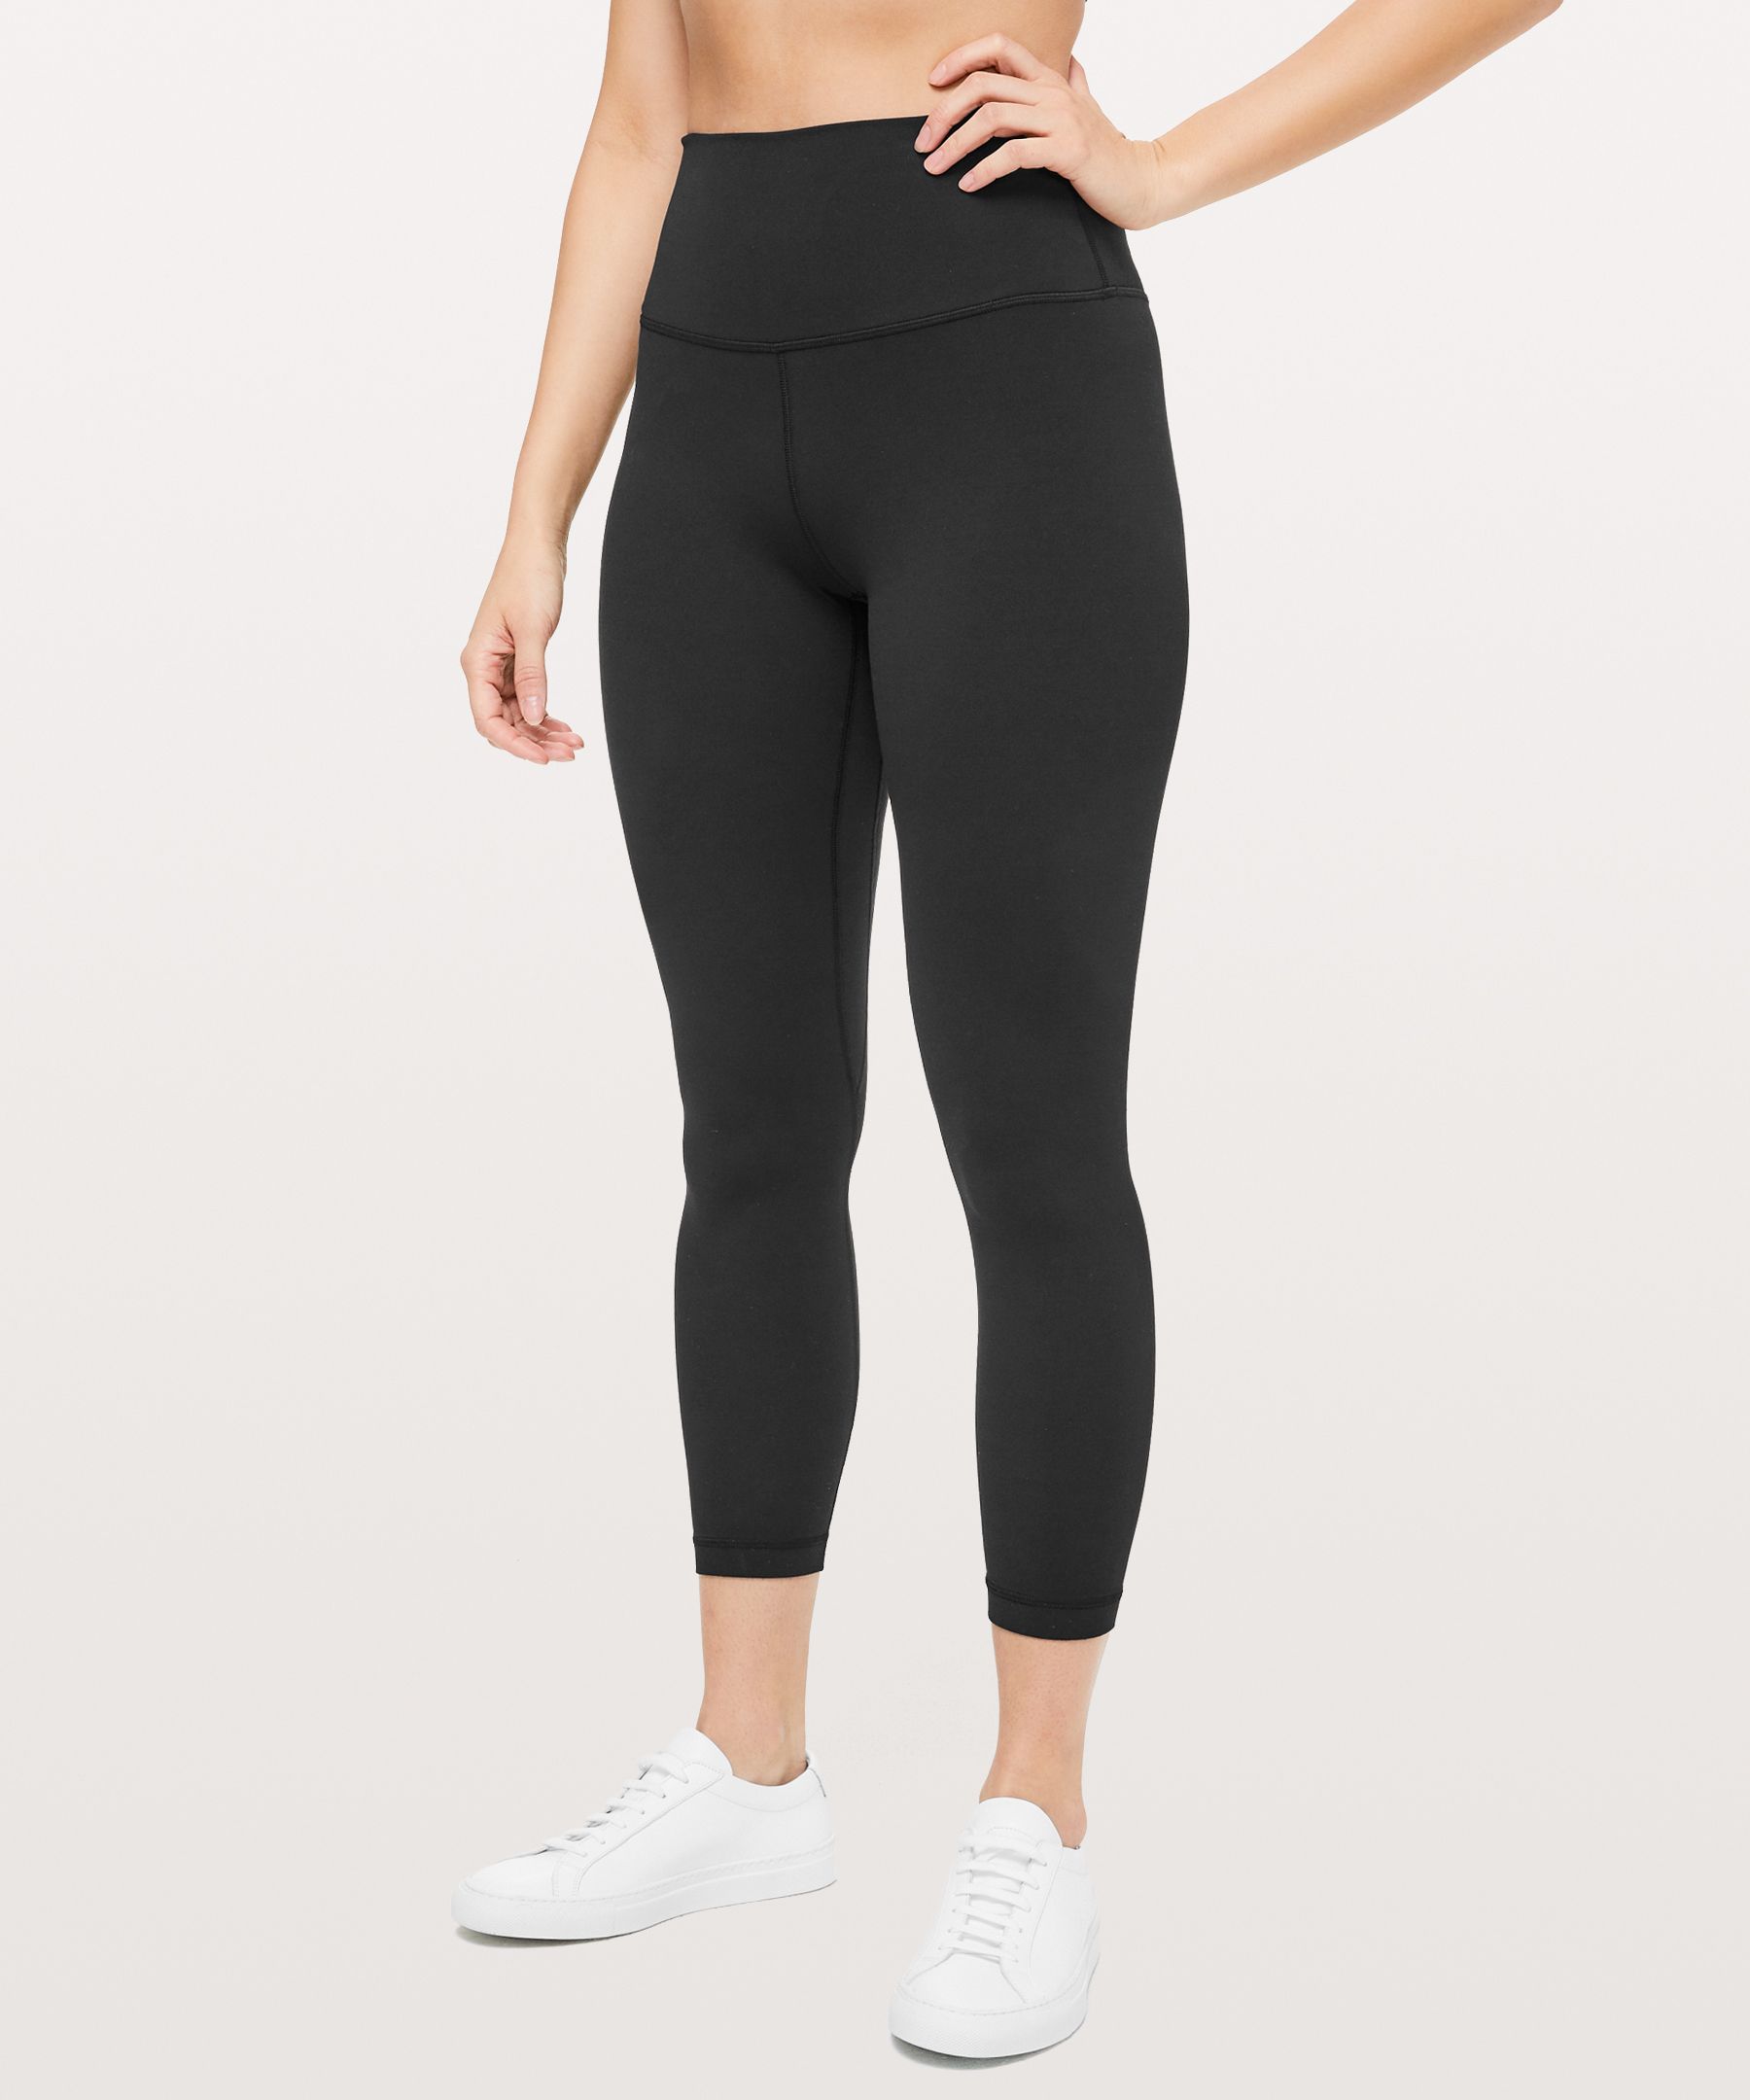 After long last, finally received my Asia Fit leggings!! : r/lululemon